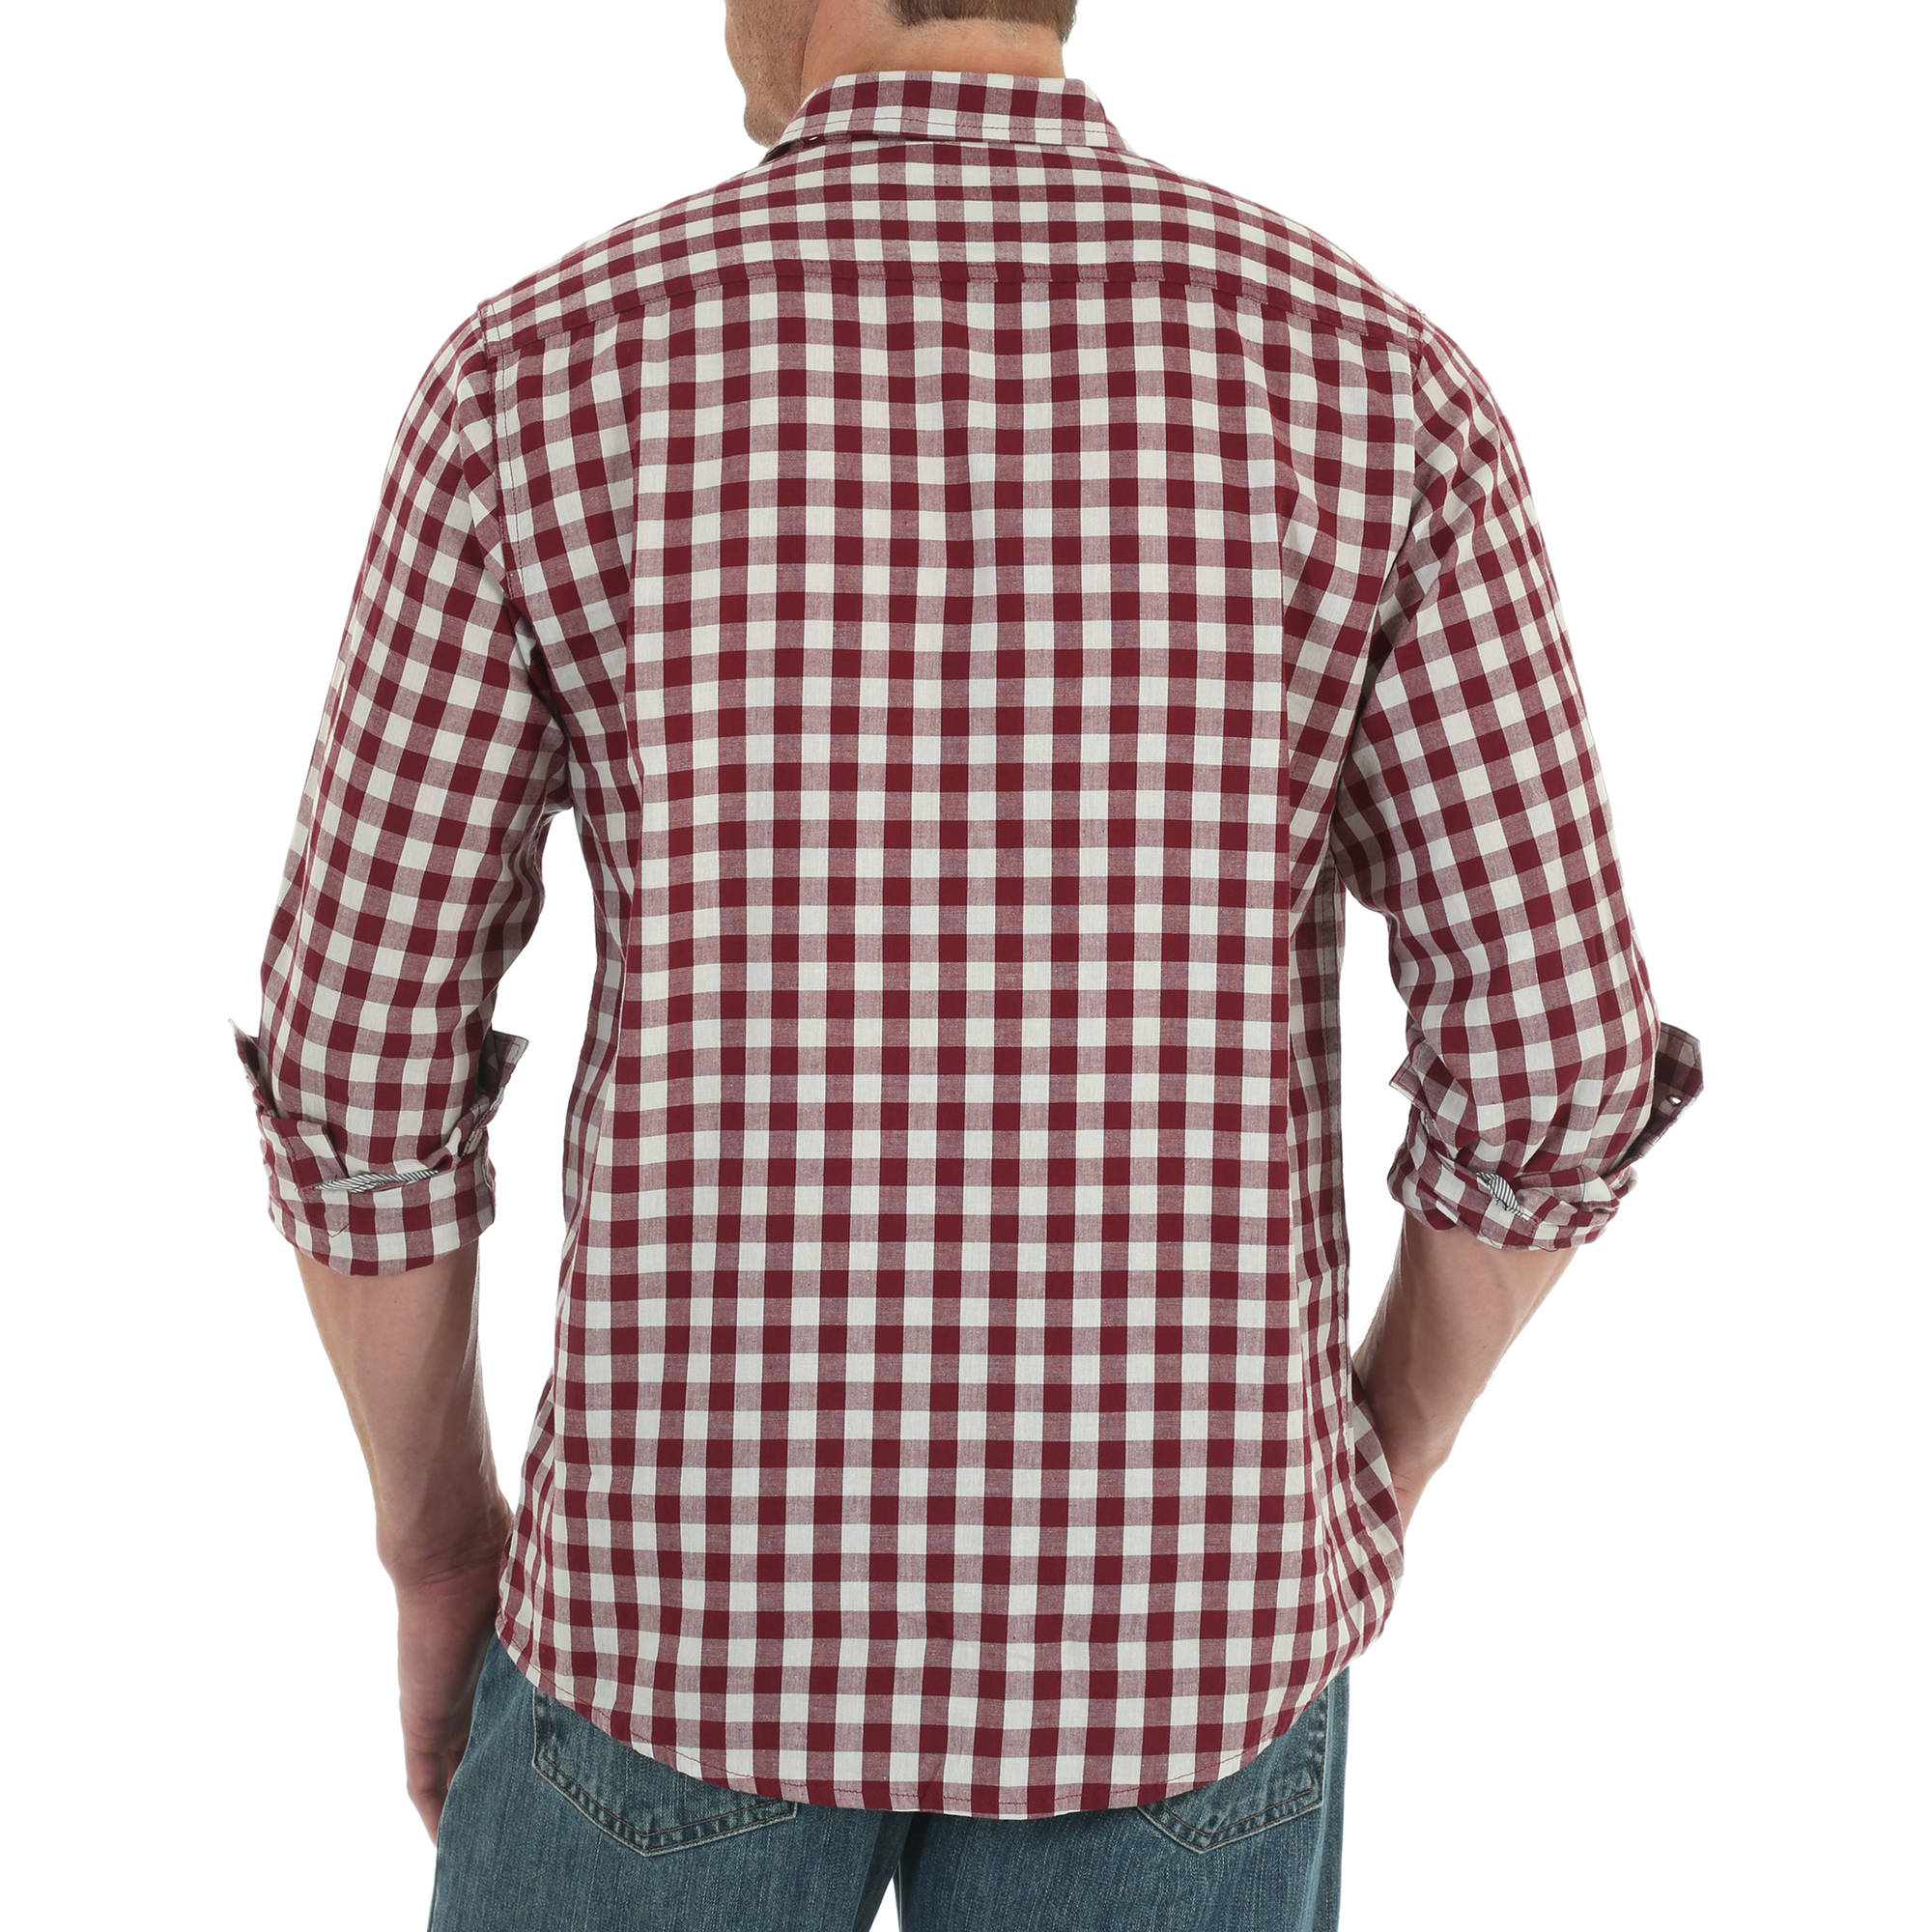 Jeans Co. Men's Long Sleeve Woven Shirt - image 2 of 2